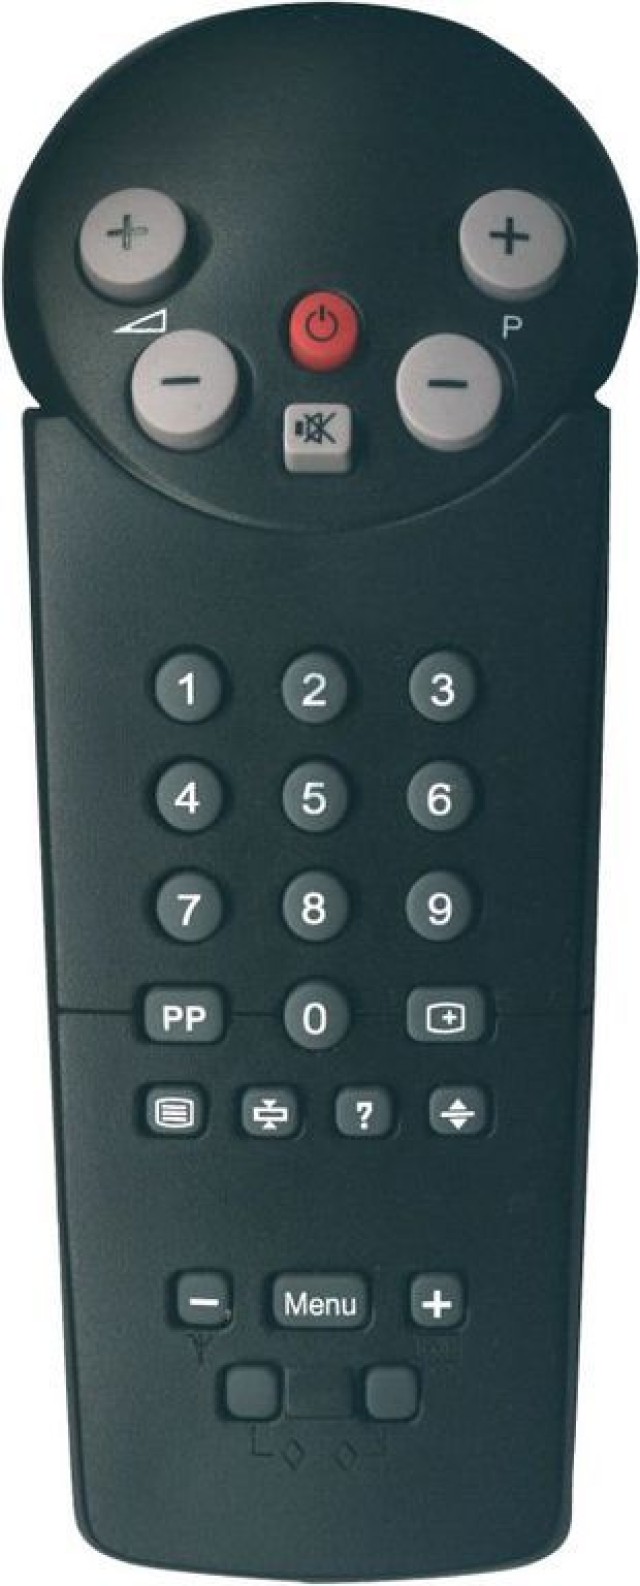 OEM, 0053, Remote control compatible with PHILIPS RC8205